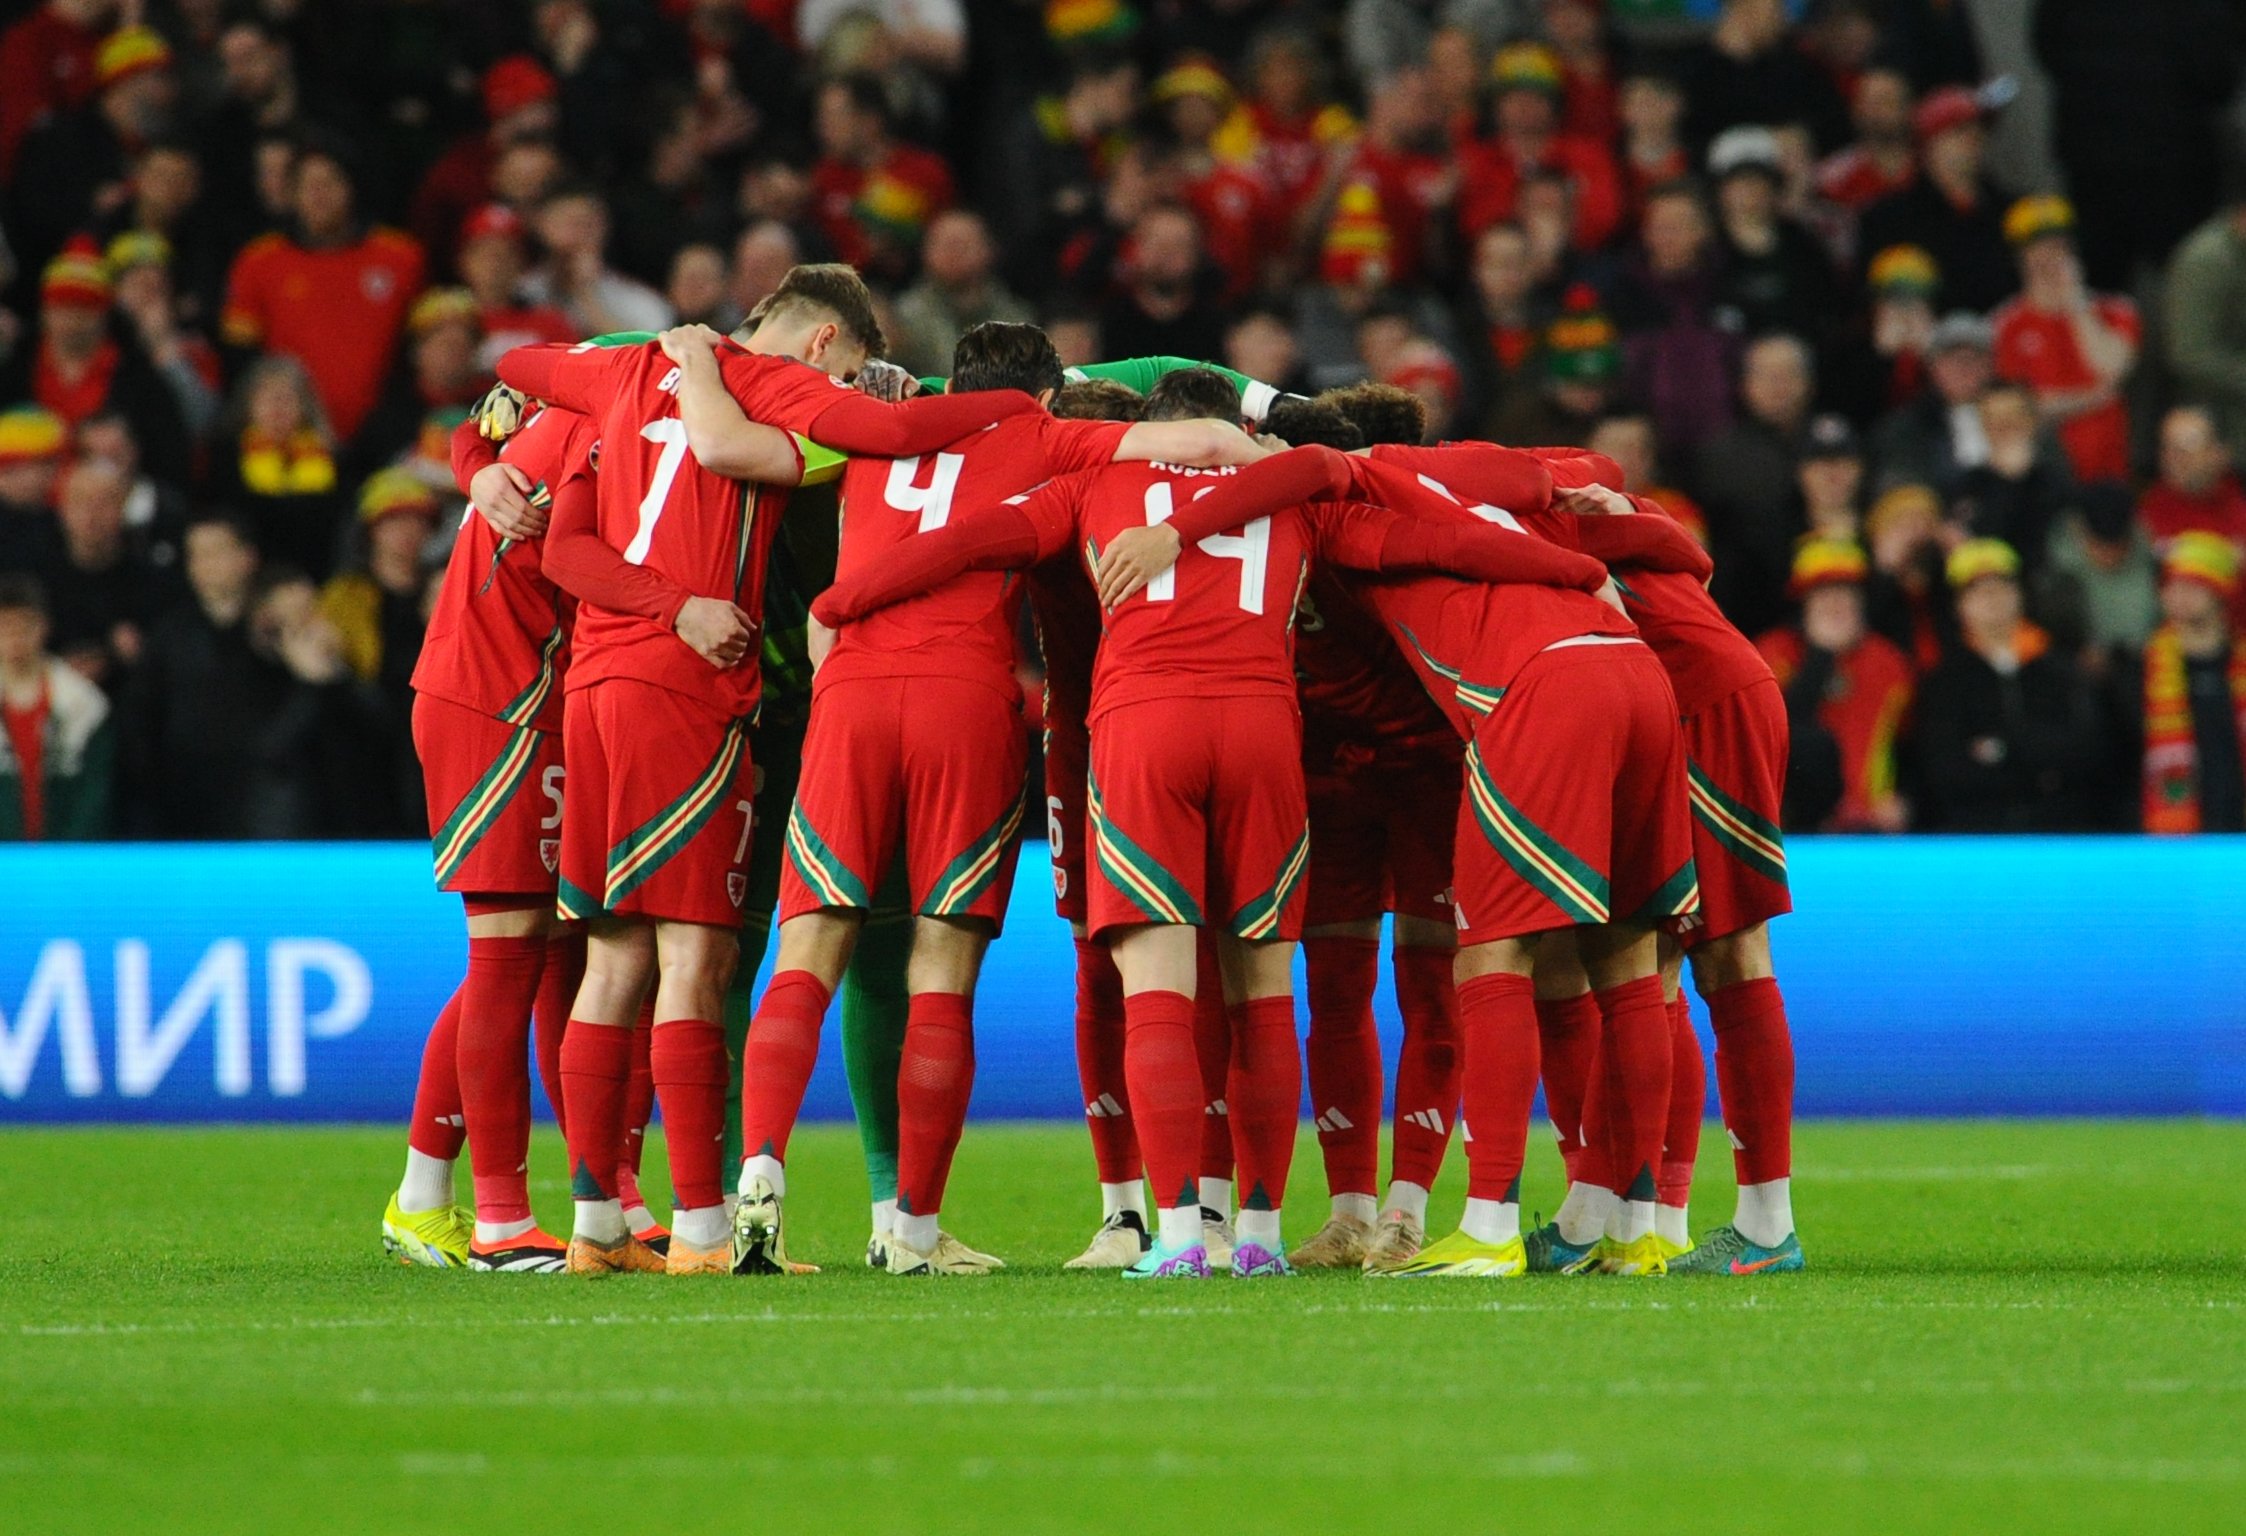 Wales have a team talk prior to kick off